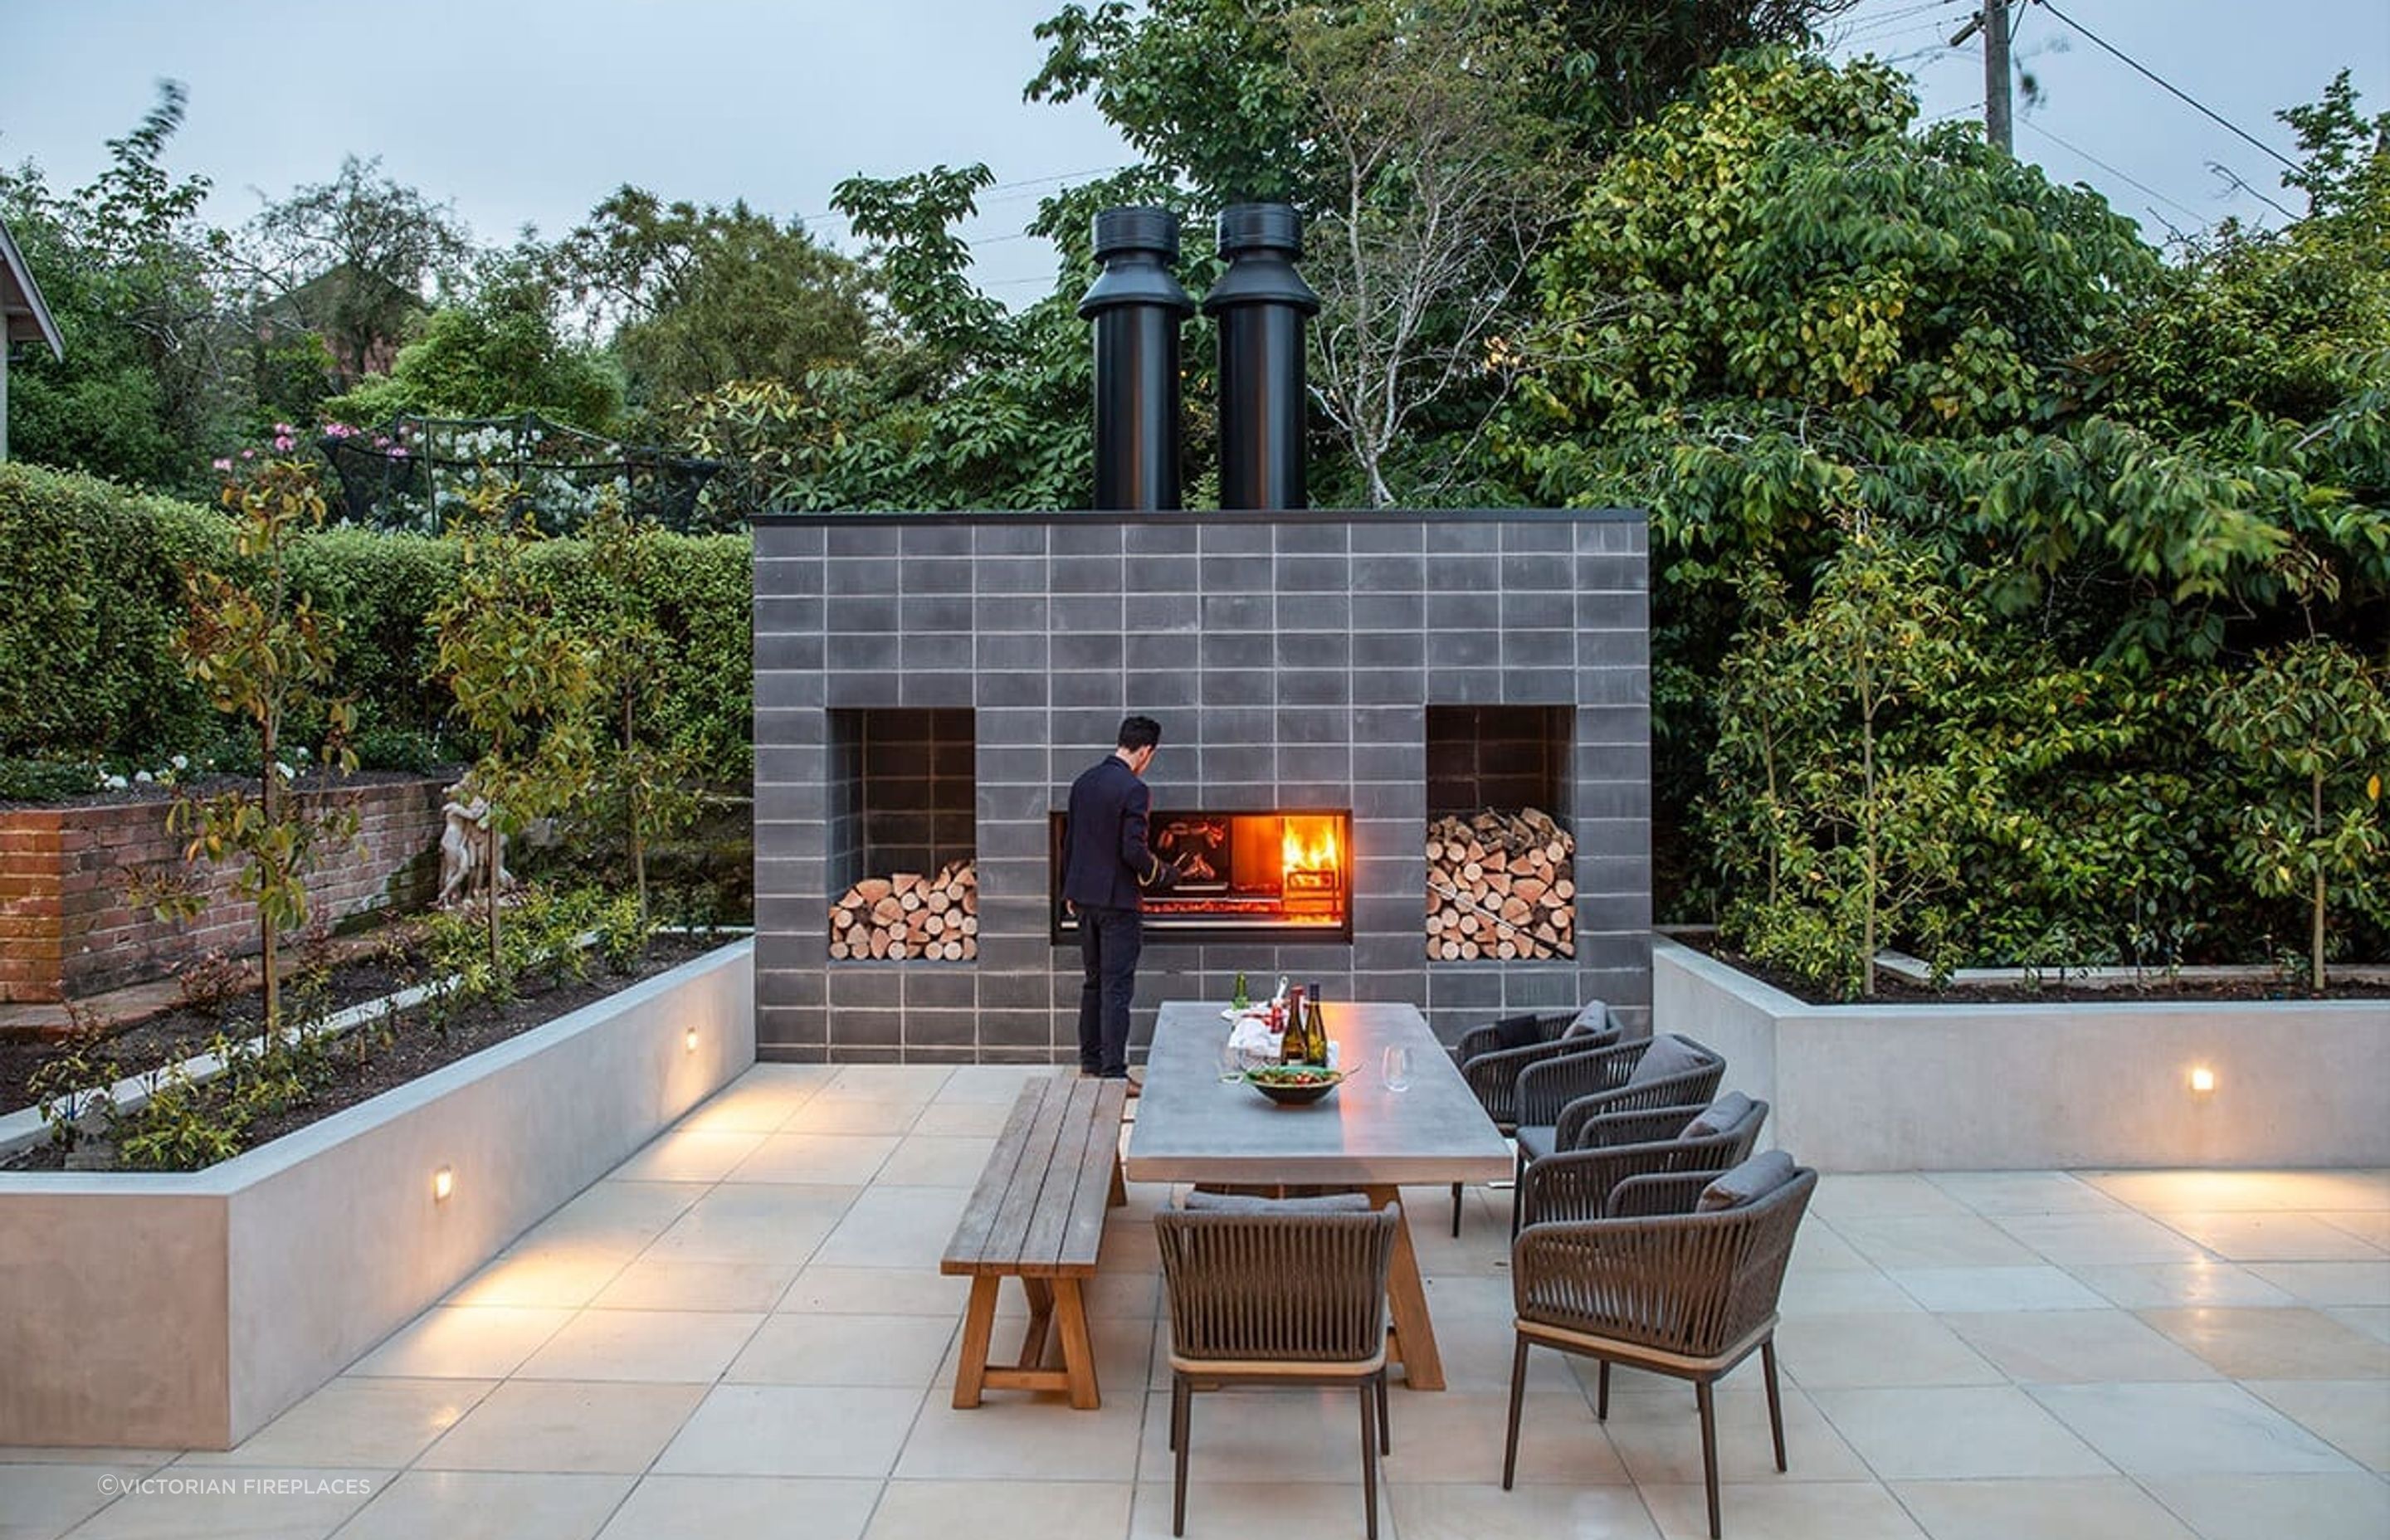 The amazing Escea Outdoor Fireplace Kitchen makes an incredible statement in any space